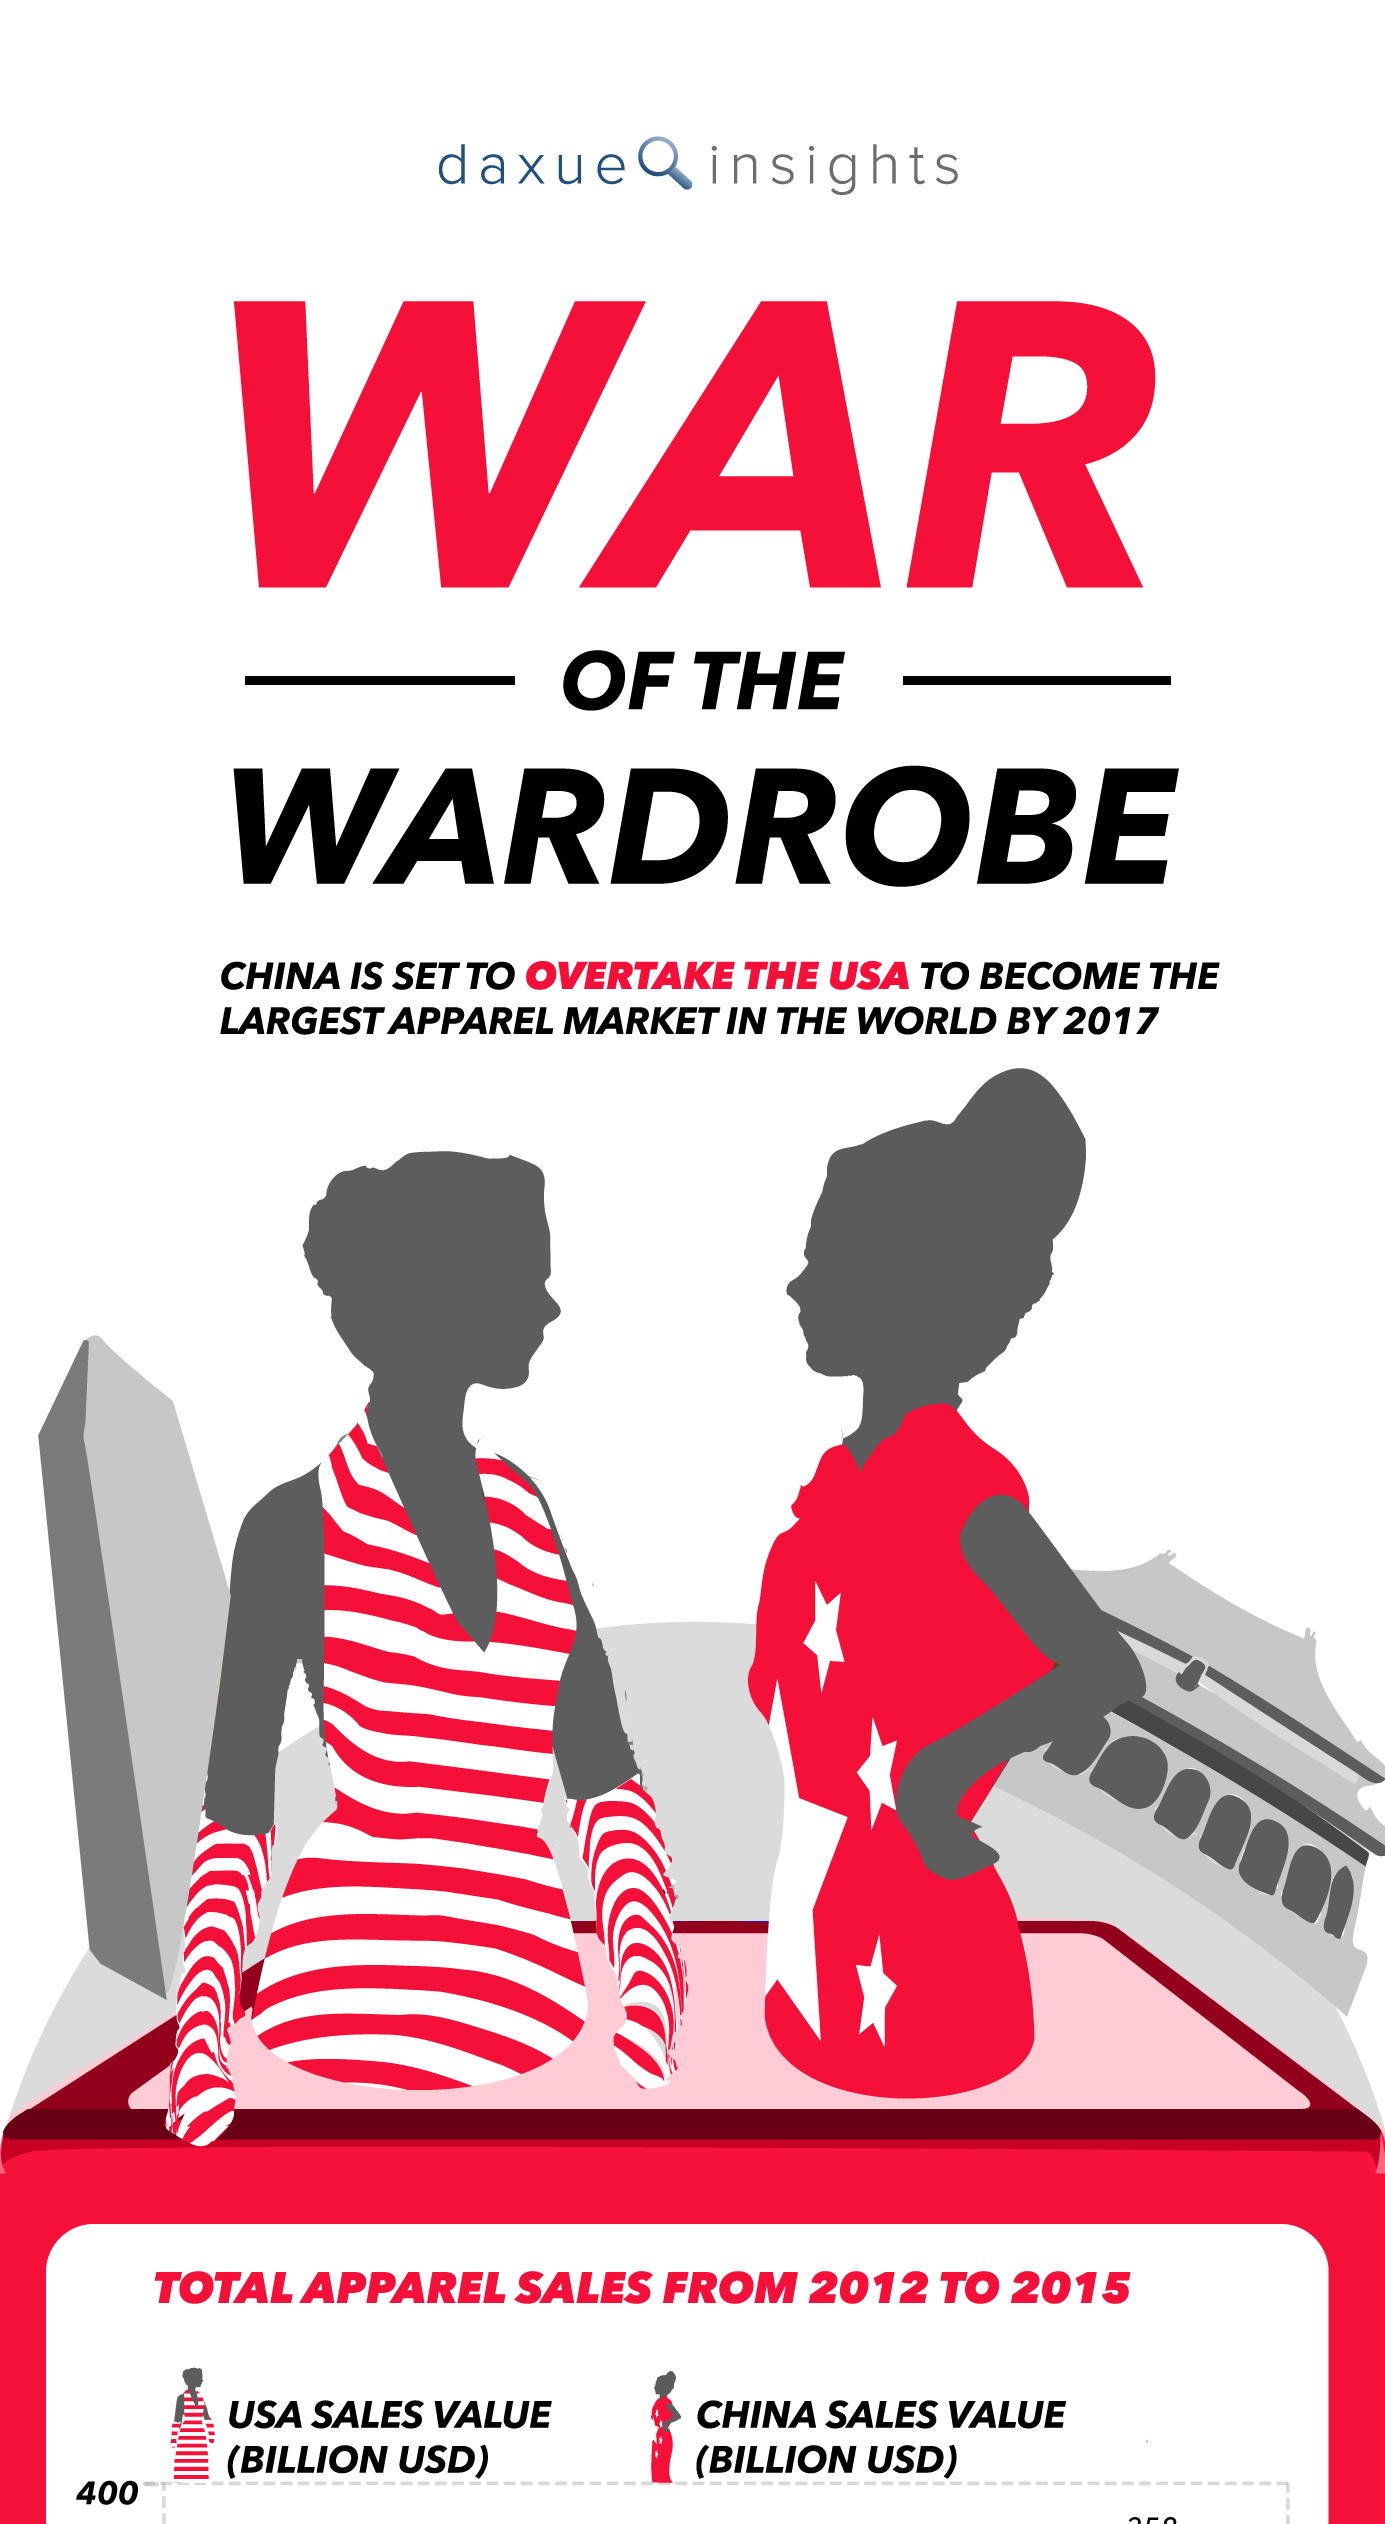 China is about to surpass the USA as the world’s largest apparel market